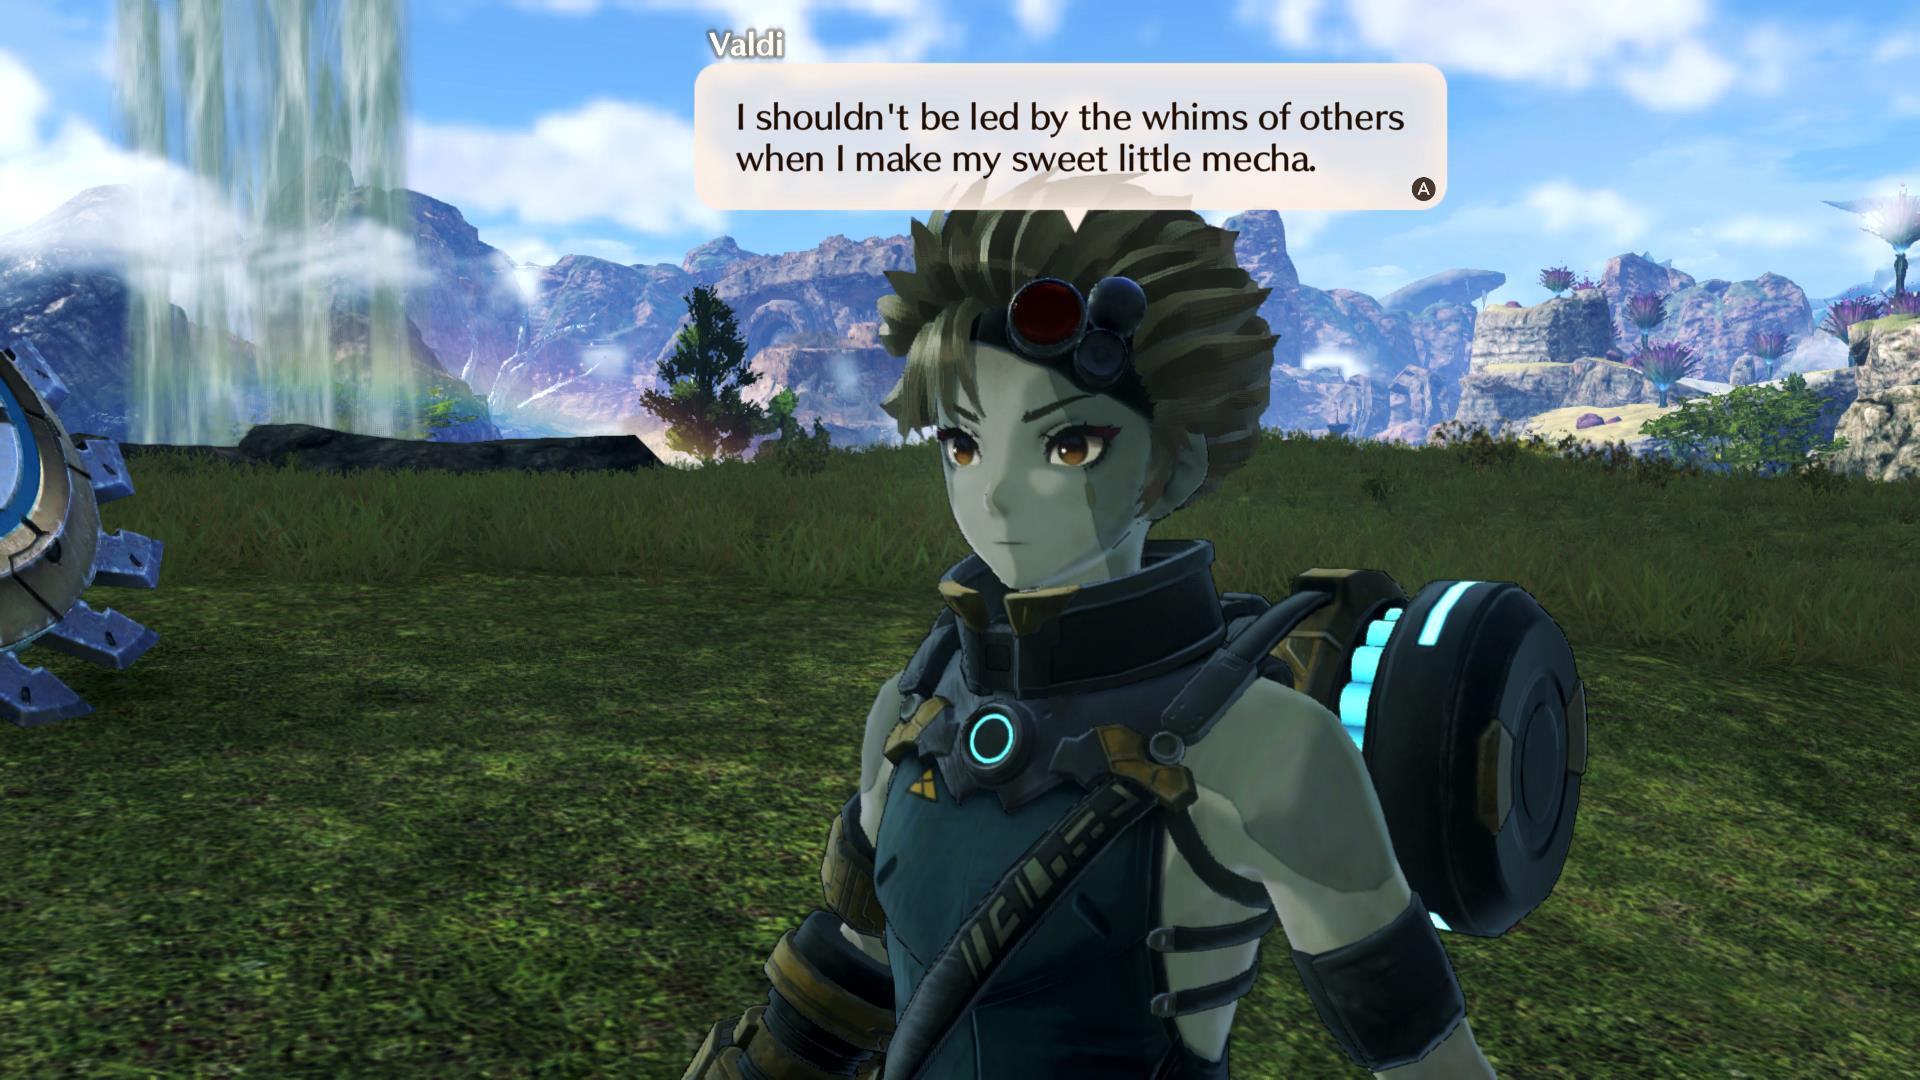 Xenoblade Chronicles 3 is complex, gargantuan, and brilliant, Hands-on  preview